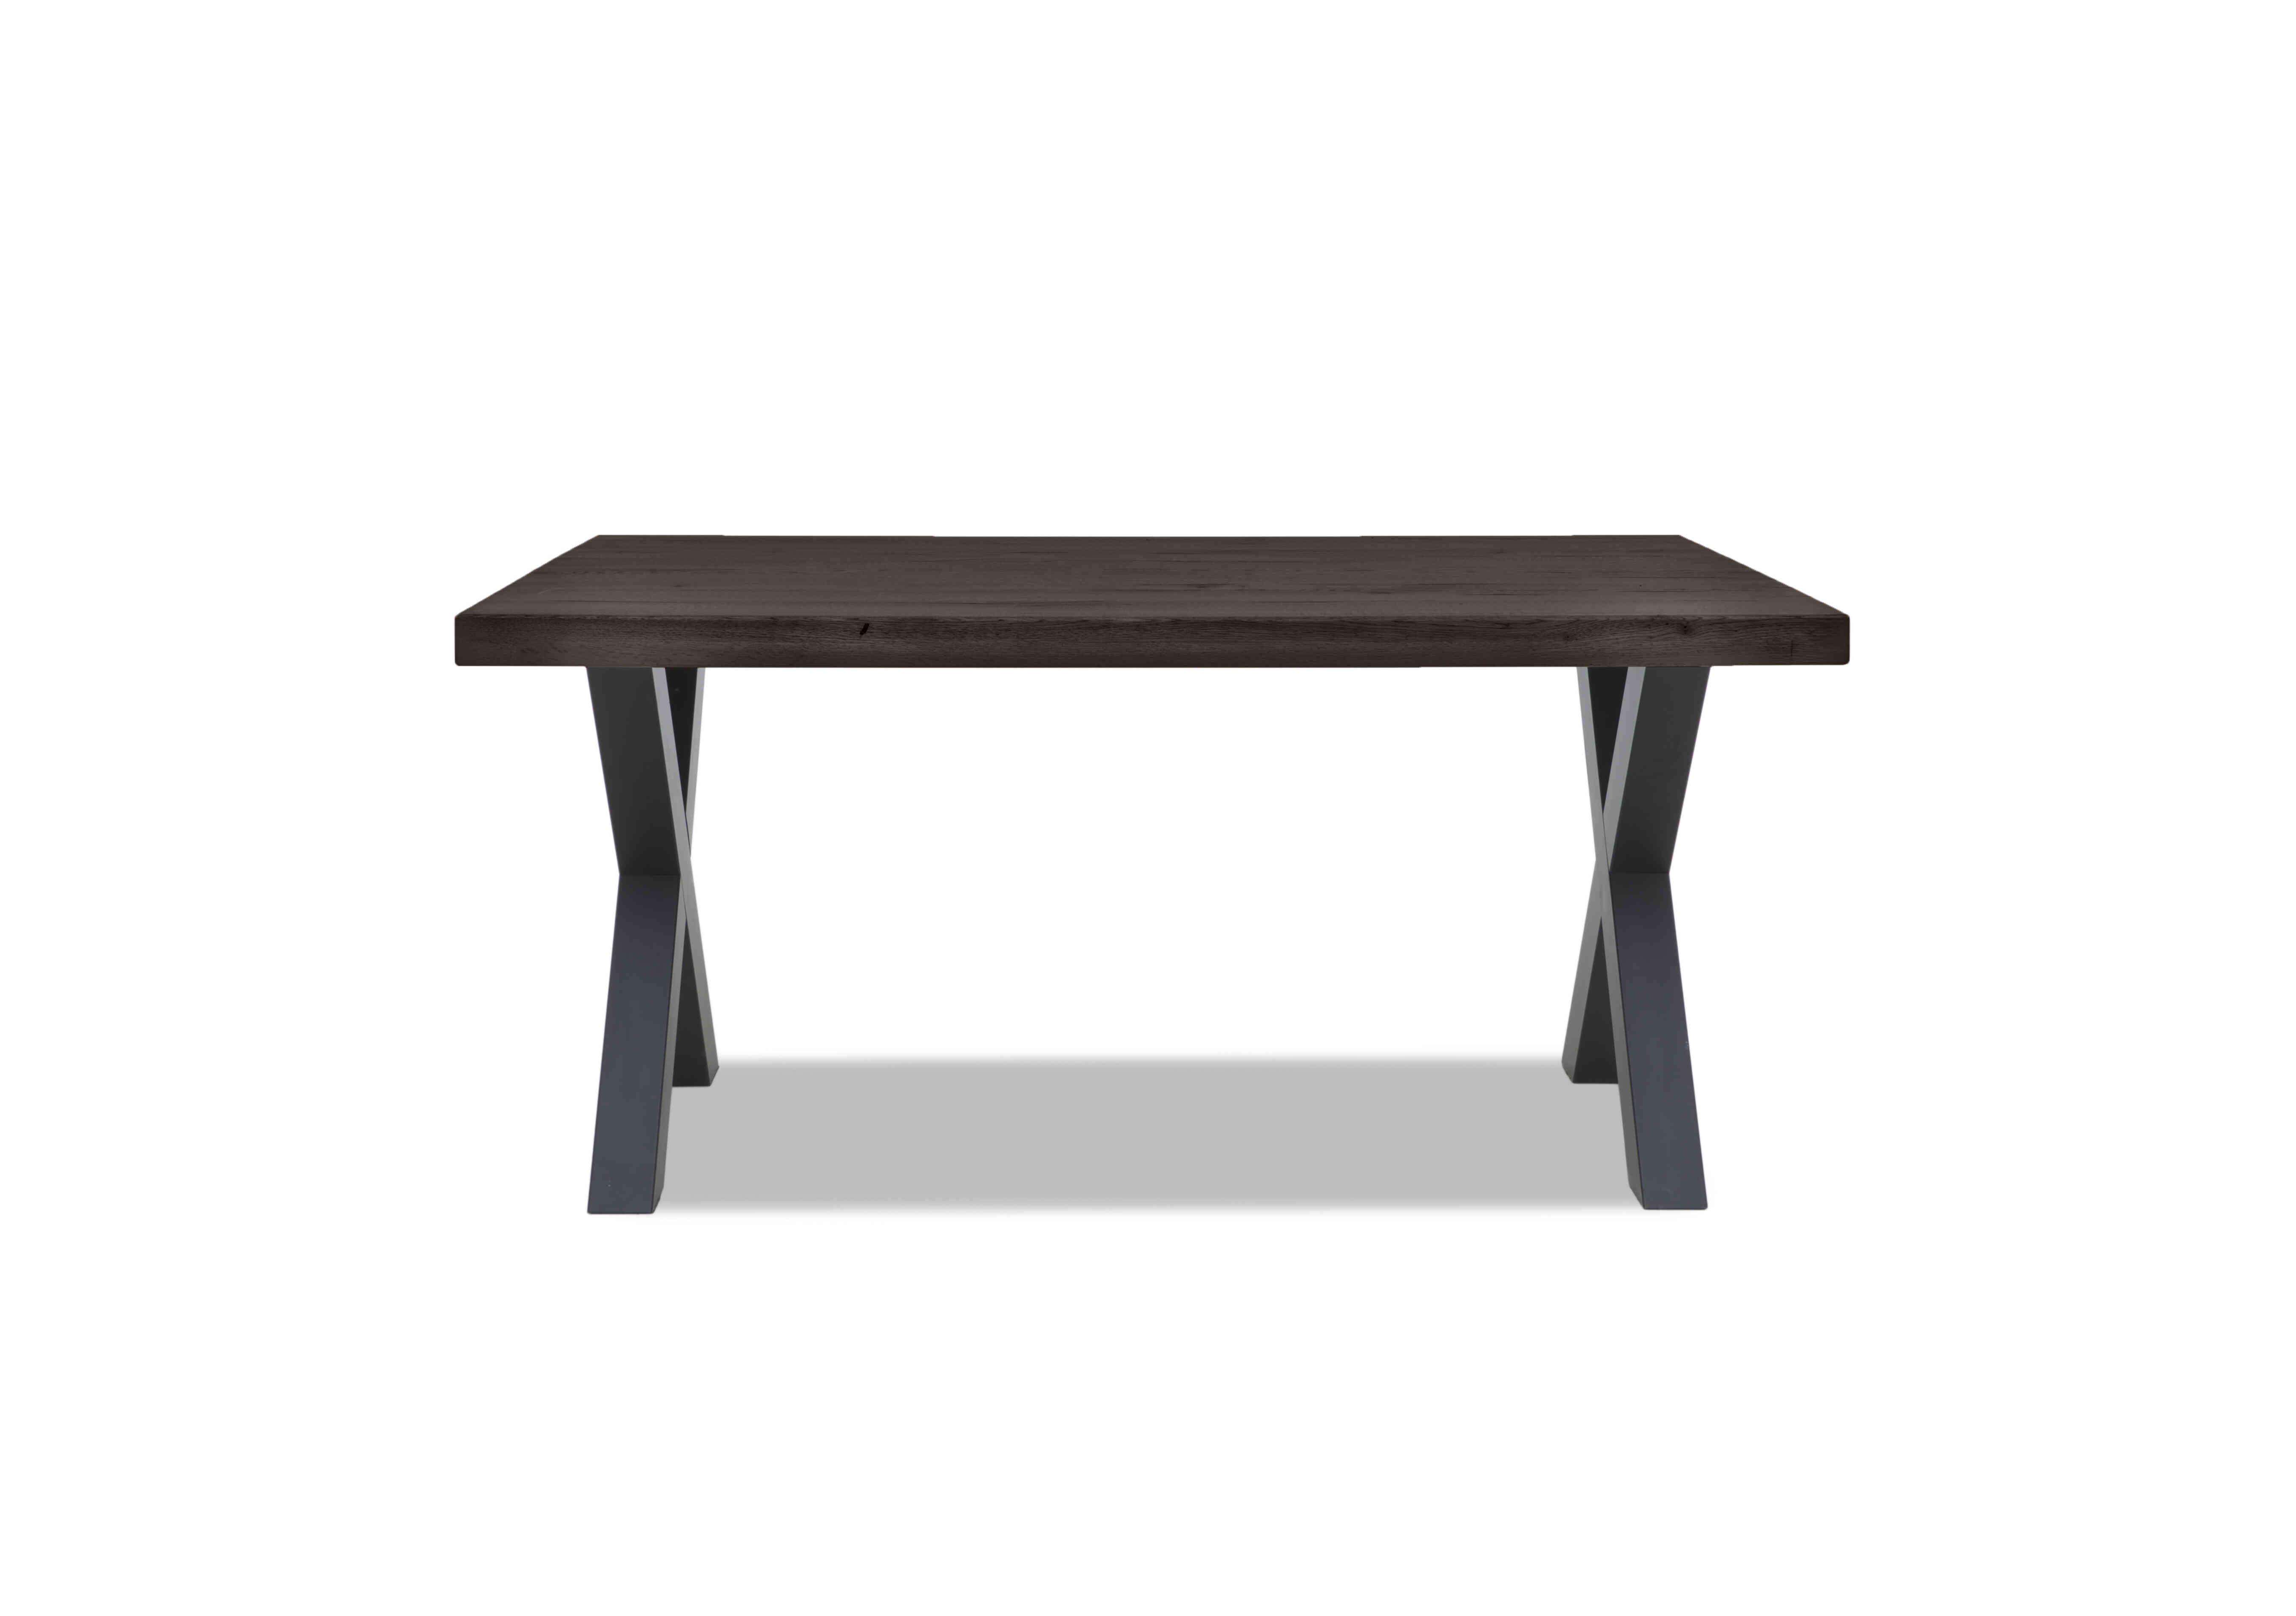 Compact Terra Straight Edge Dining Table with X-Shaped Legs in 02 Smoked on Furniture Village